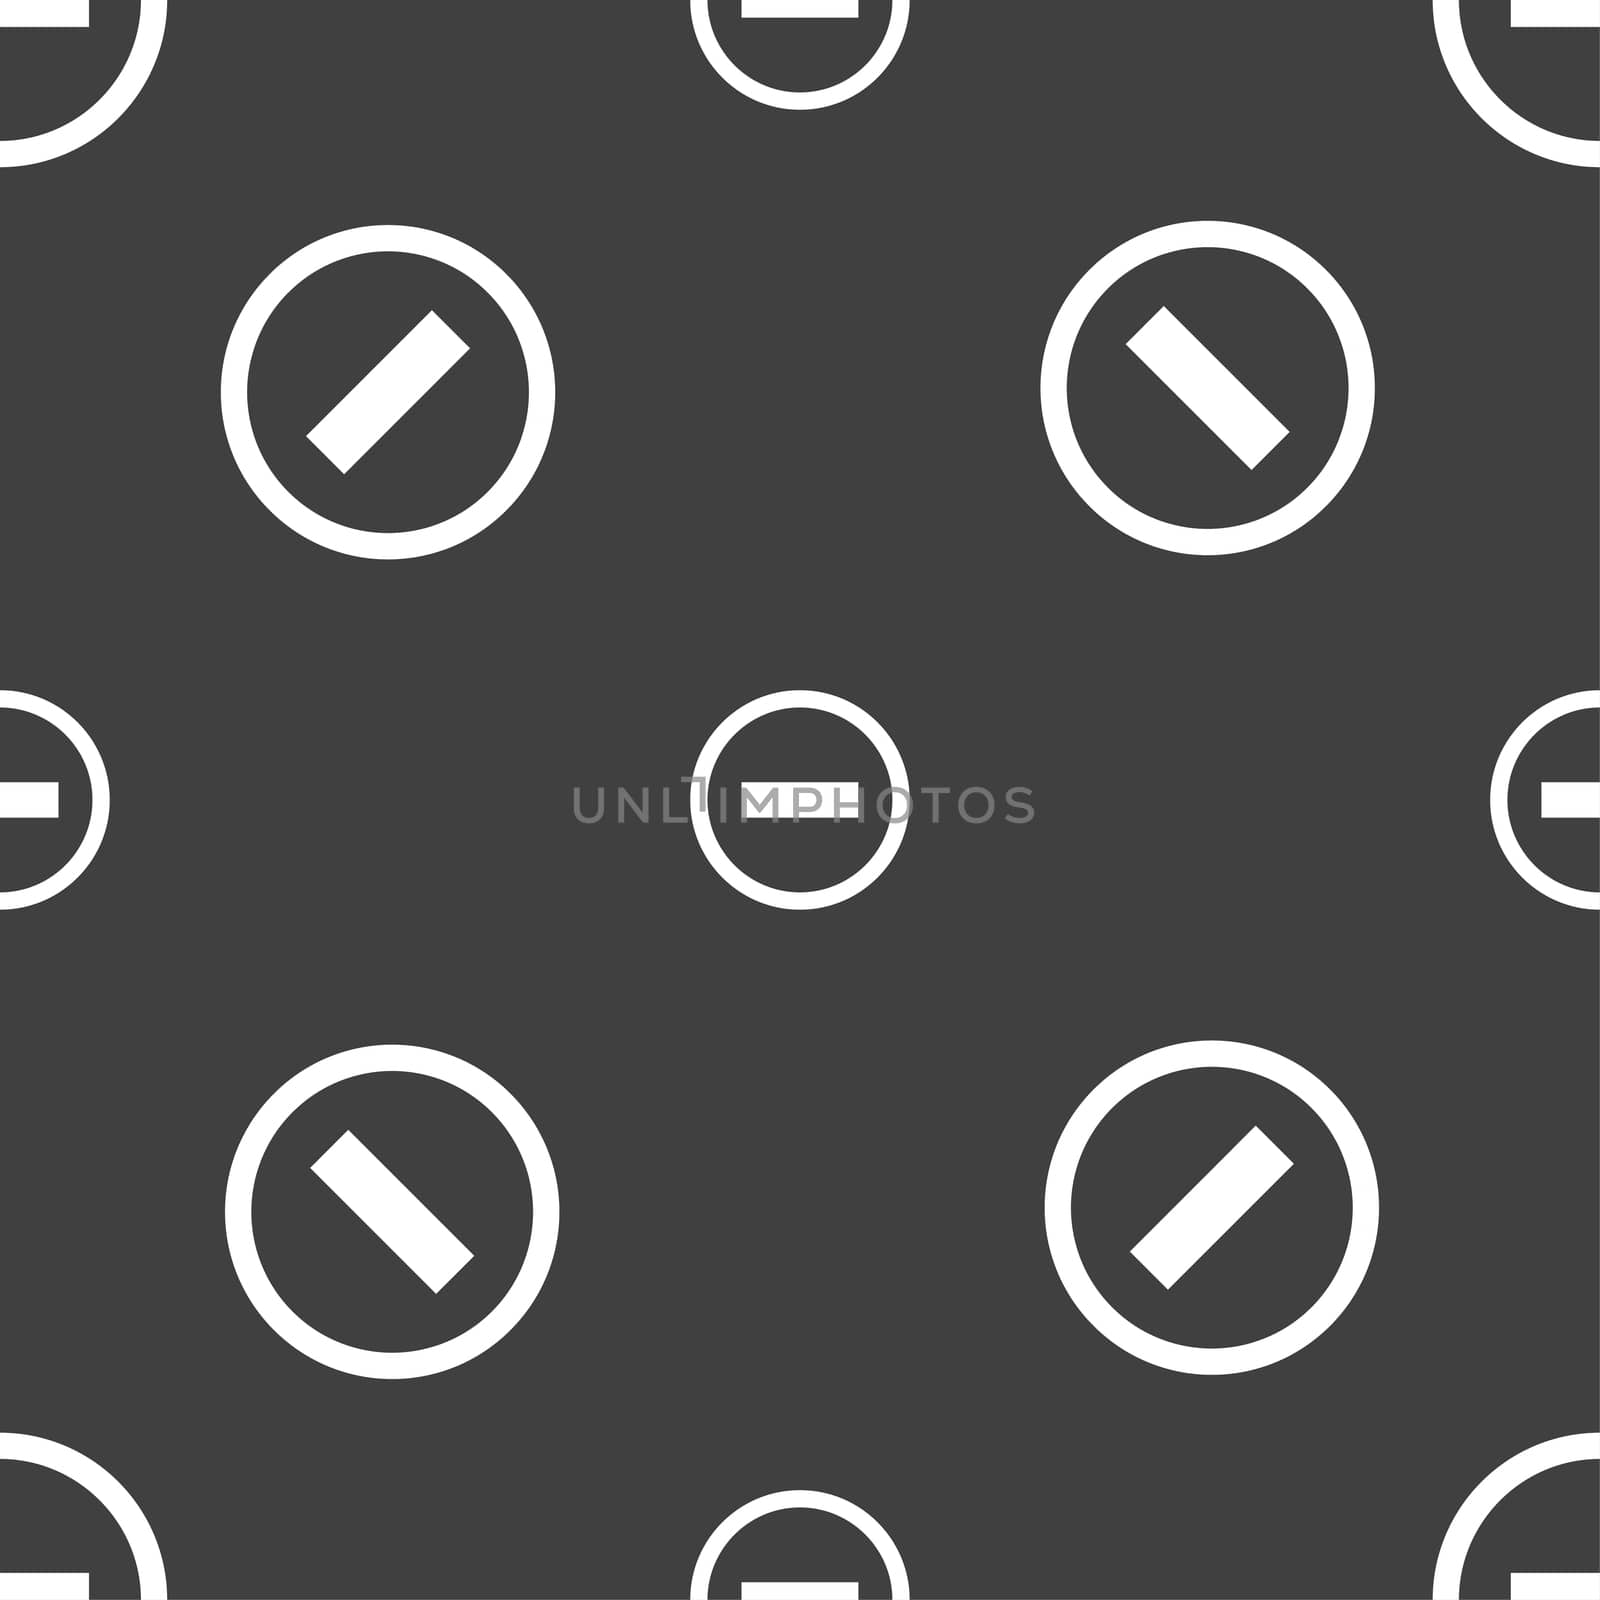 Minus sign icon. Negative symbol. Zoom out. Seamless pattern on a gray background. illustration